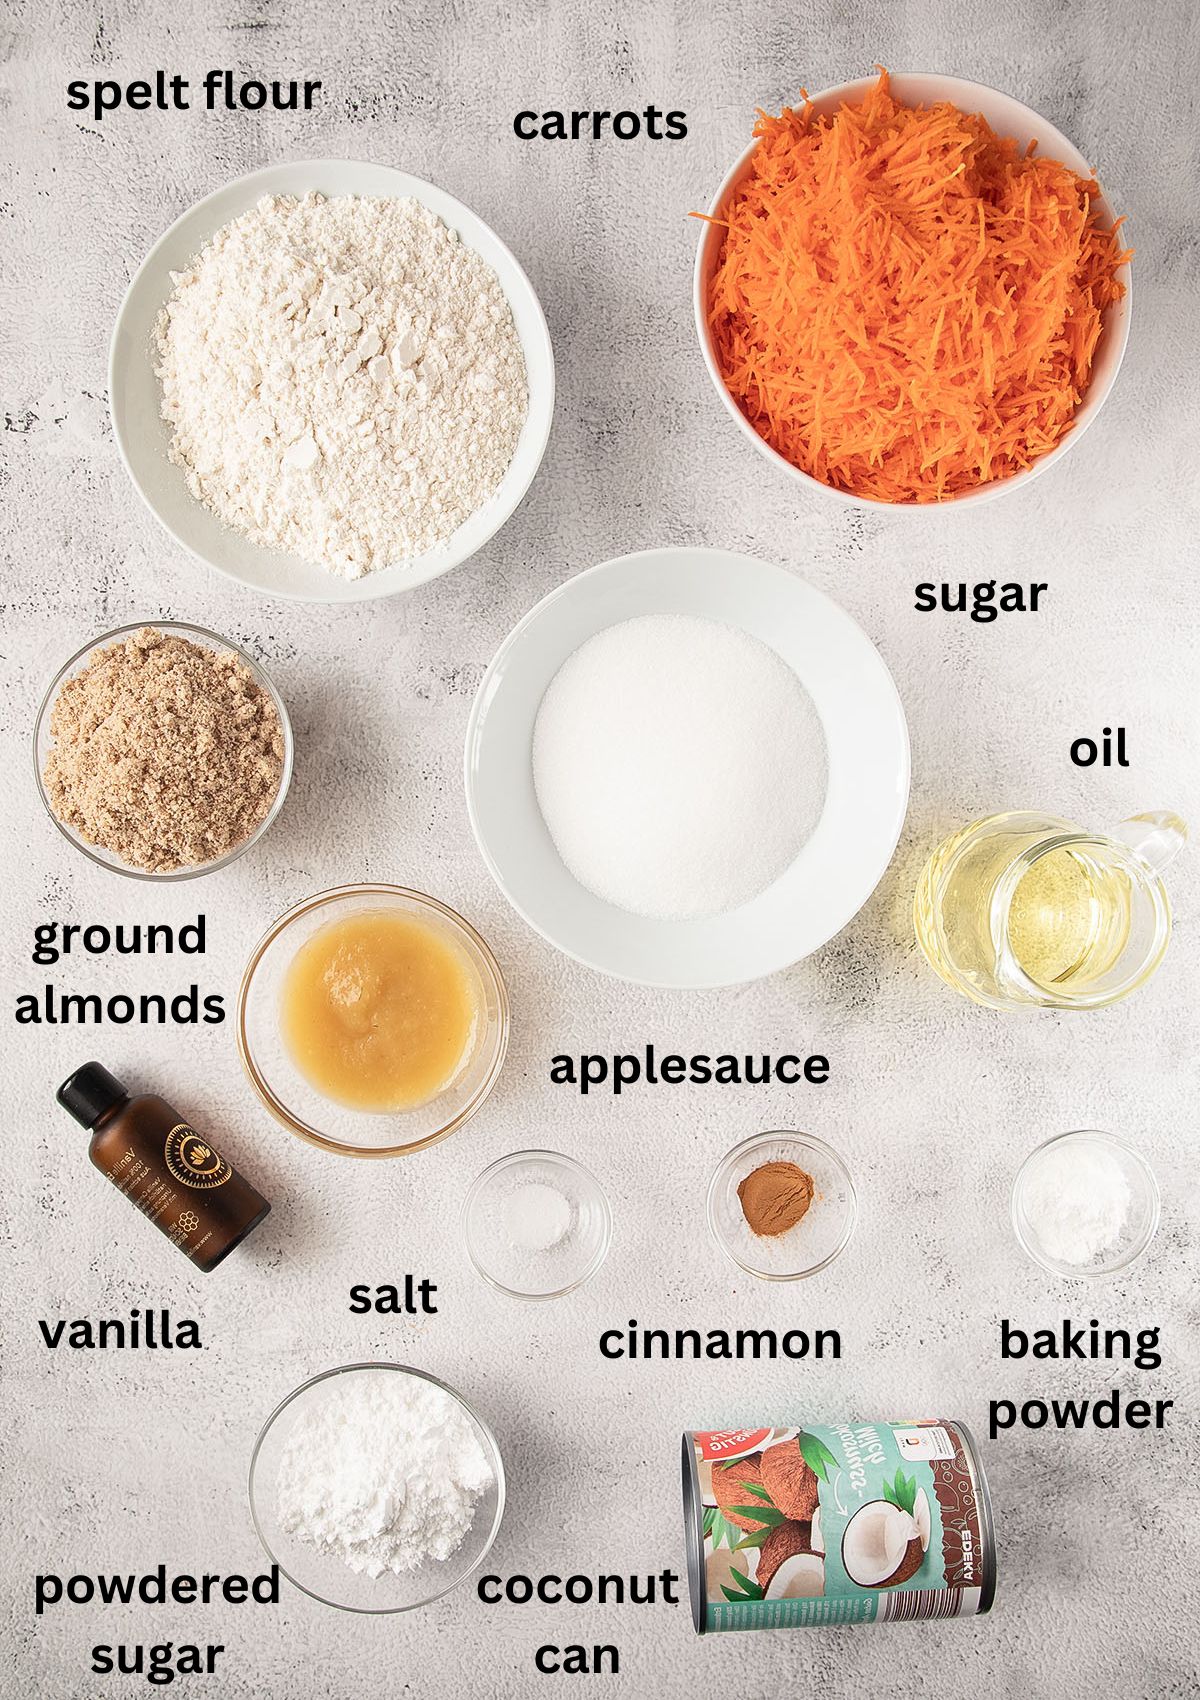 labeled ingredients for making a vegan carrot cake with spelt flour, coconut cream frosting, ground almonds and cinnamon.